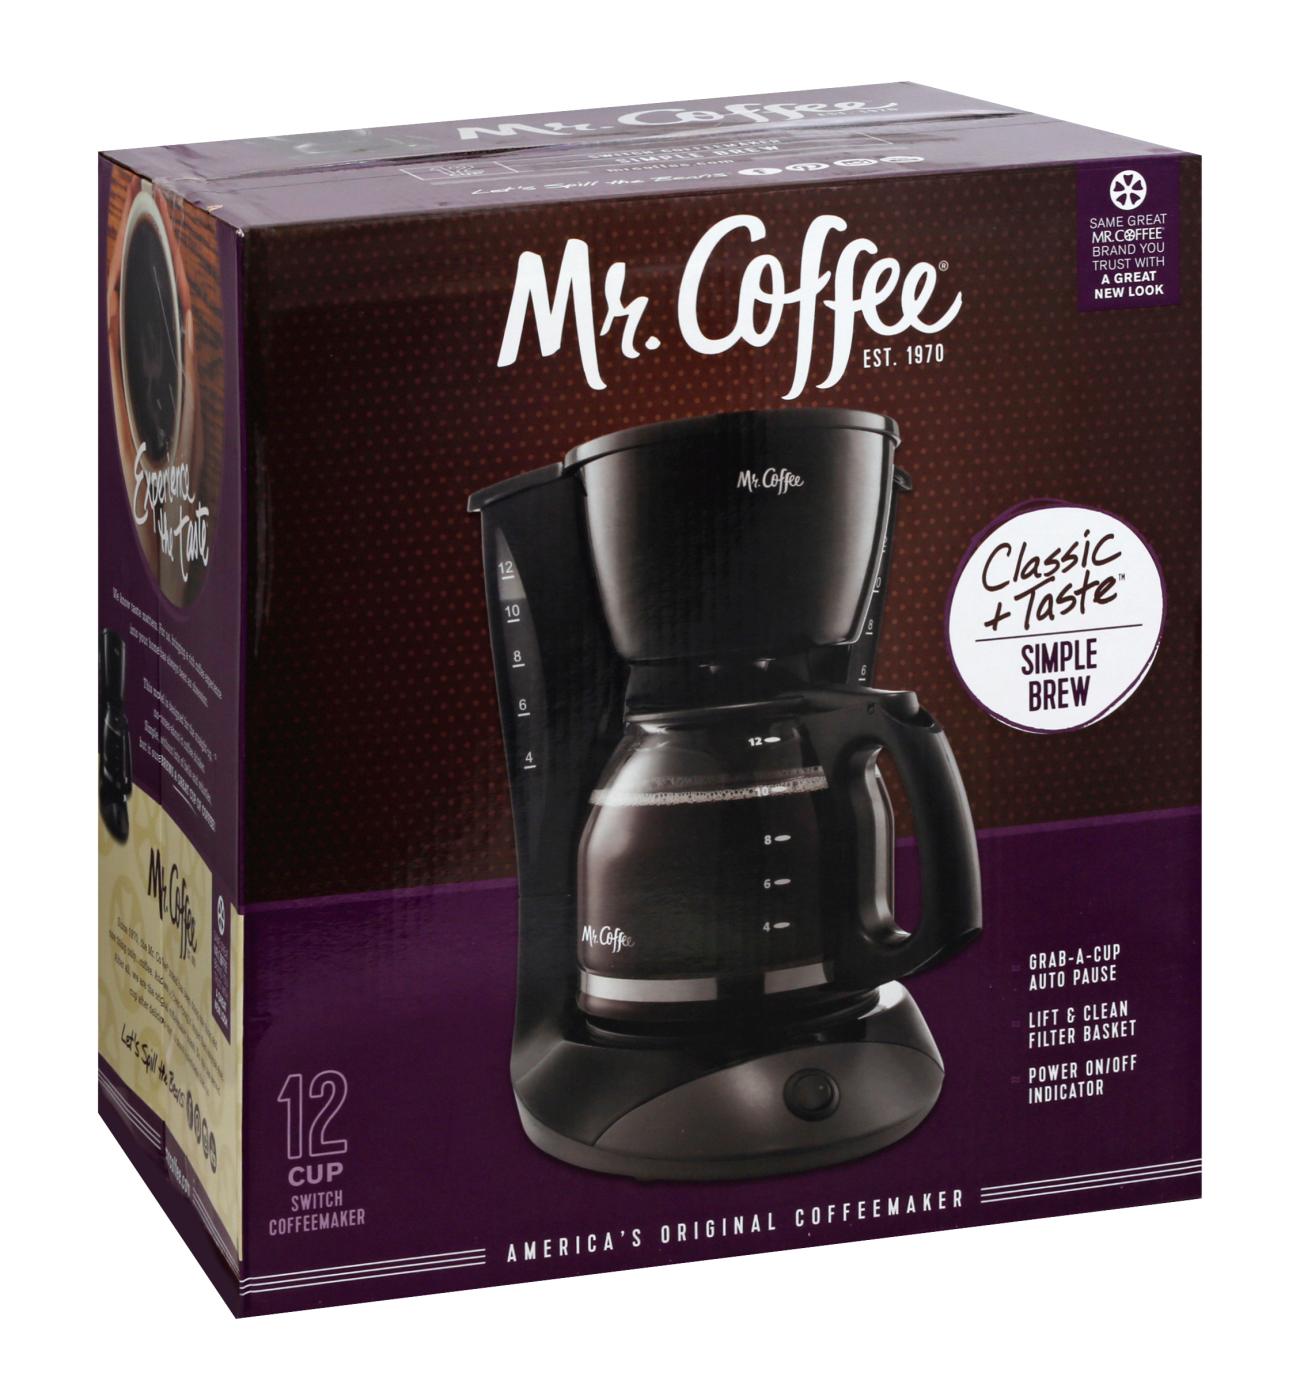 Ninja DualBrew Grounds & Pods Coffee Maker - Shop Coffee Makers at H-E-B